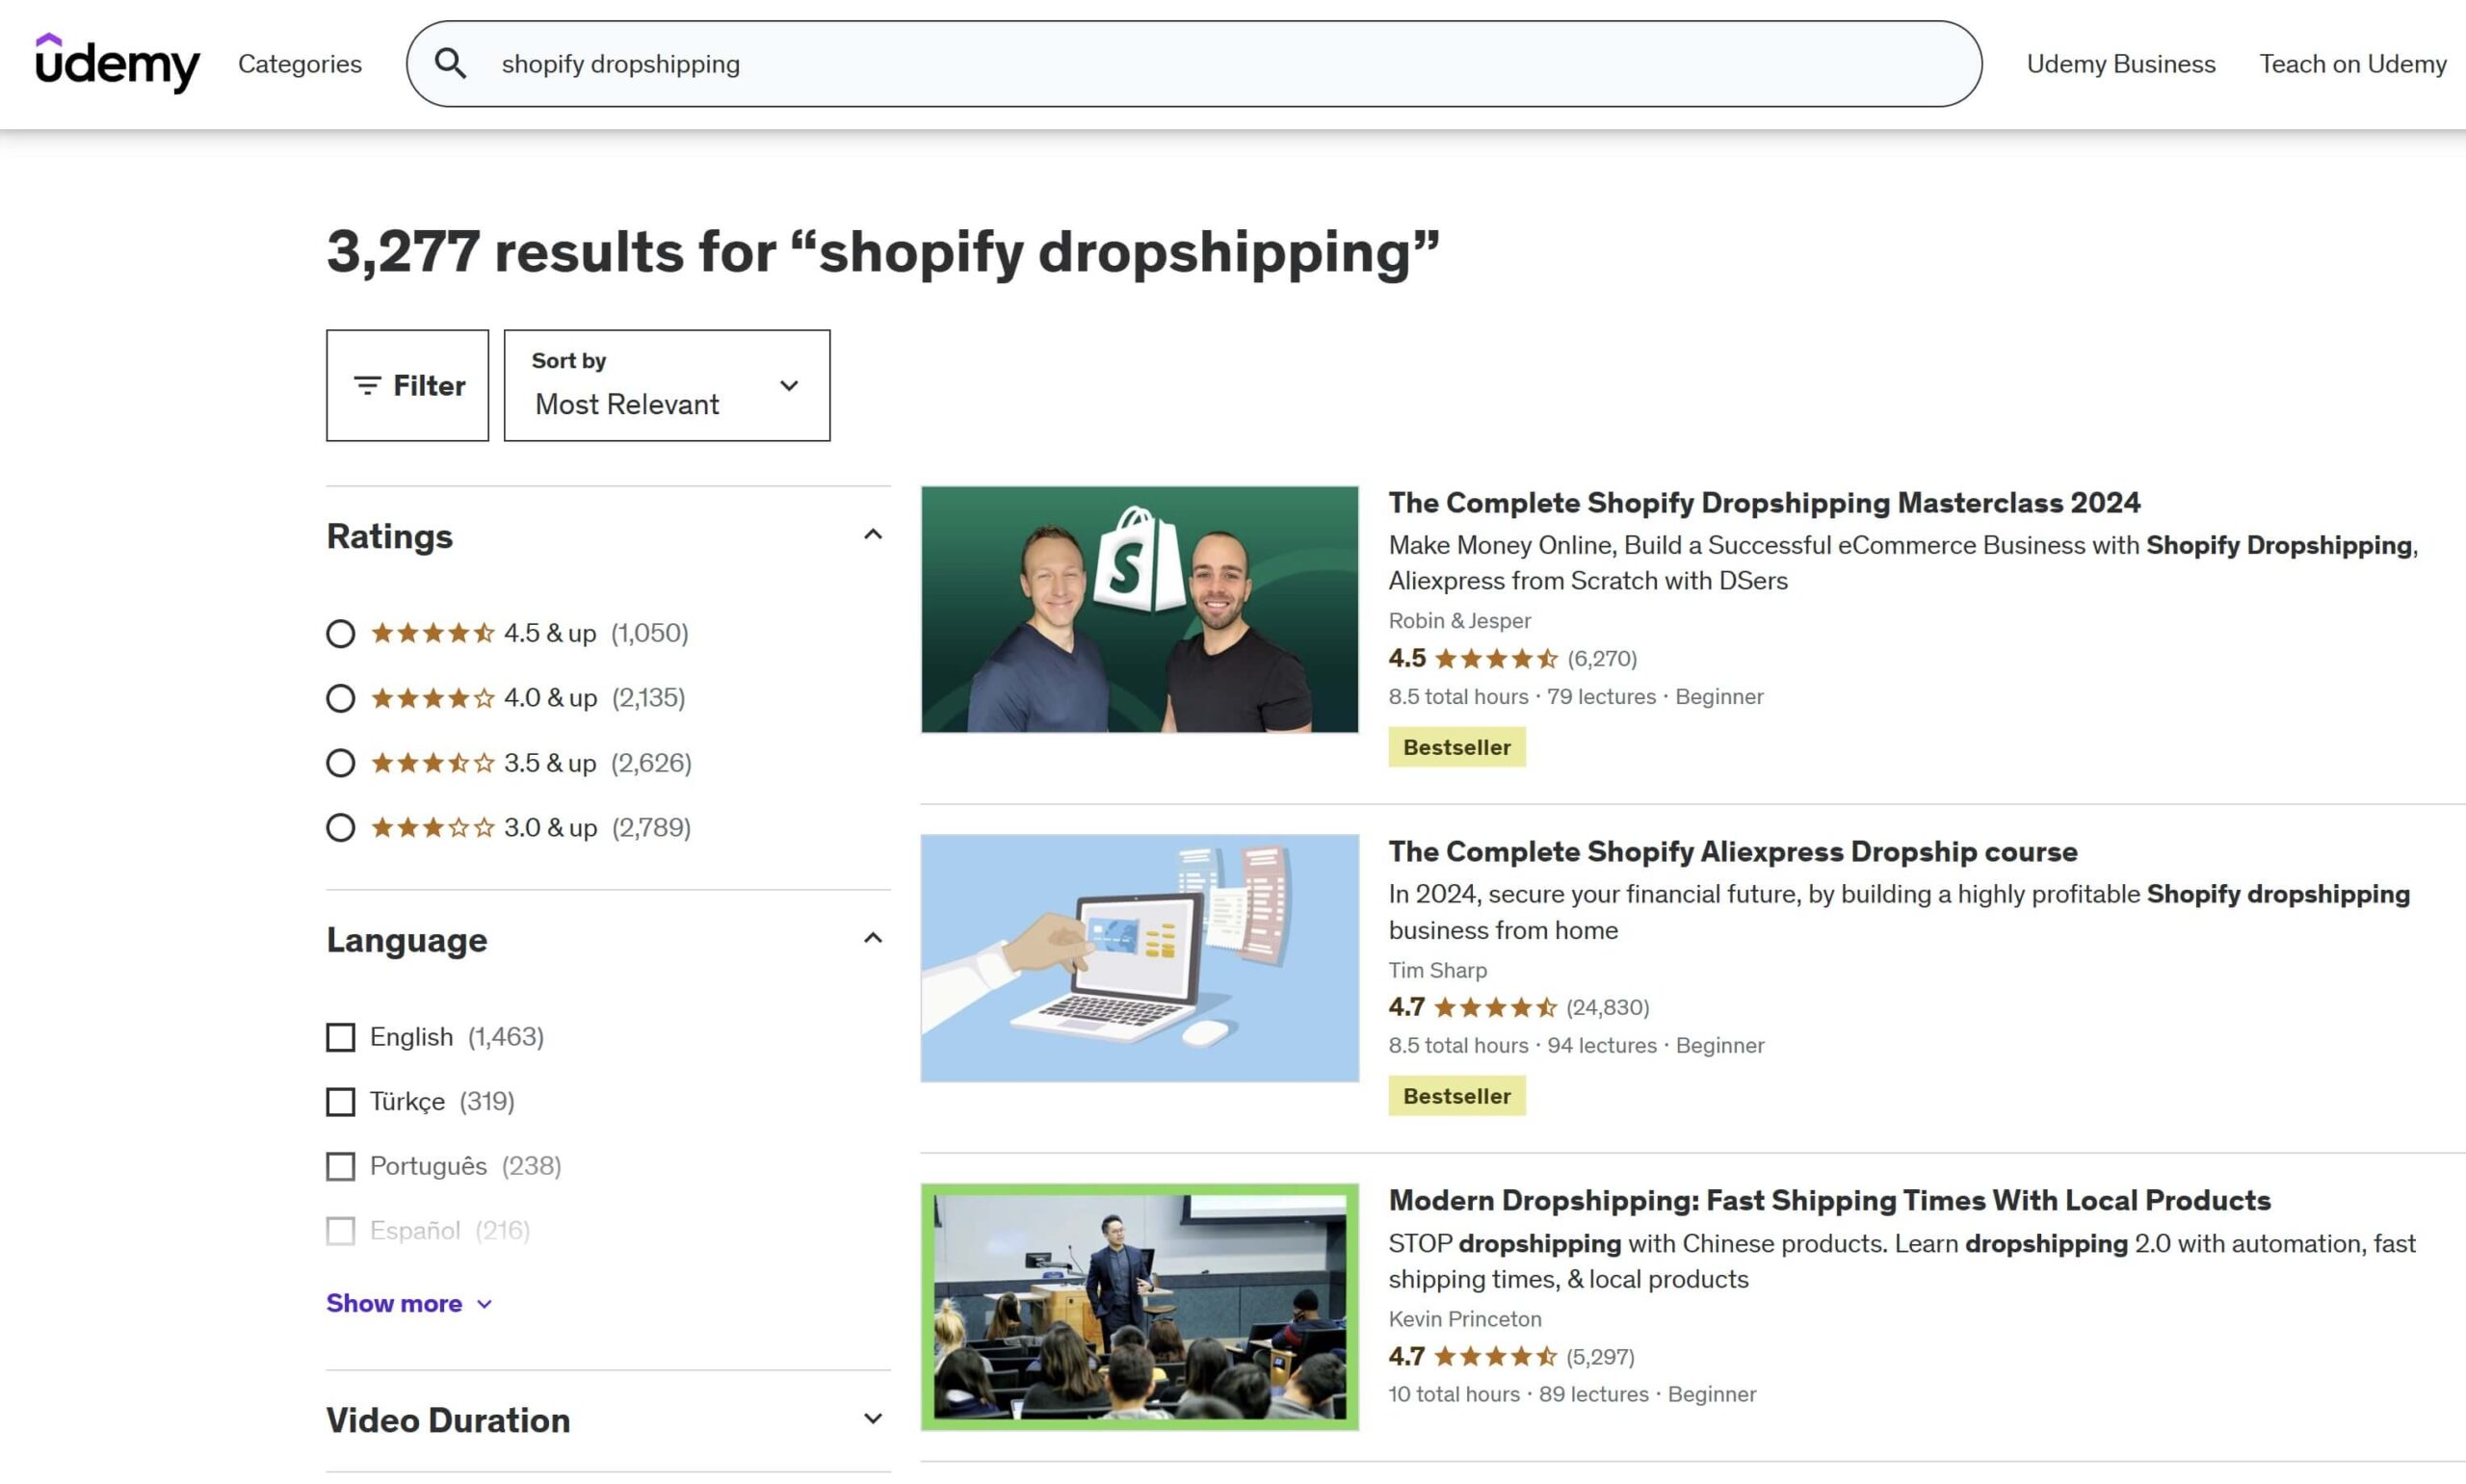 Shopify Dropshipping Search Results on Udemy